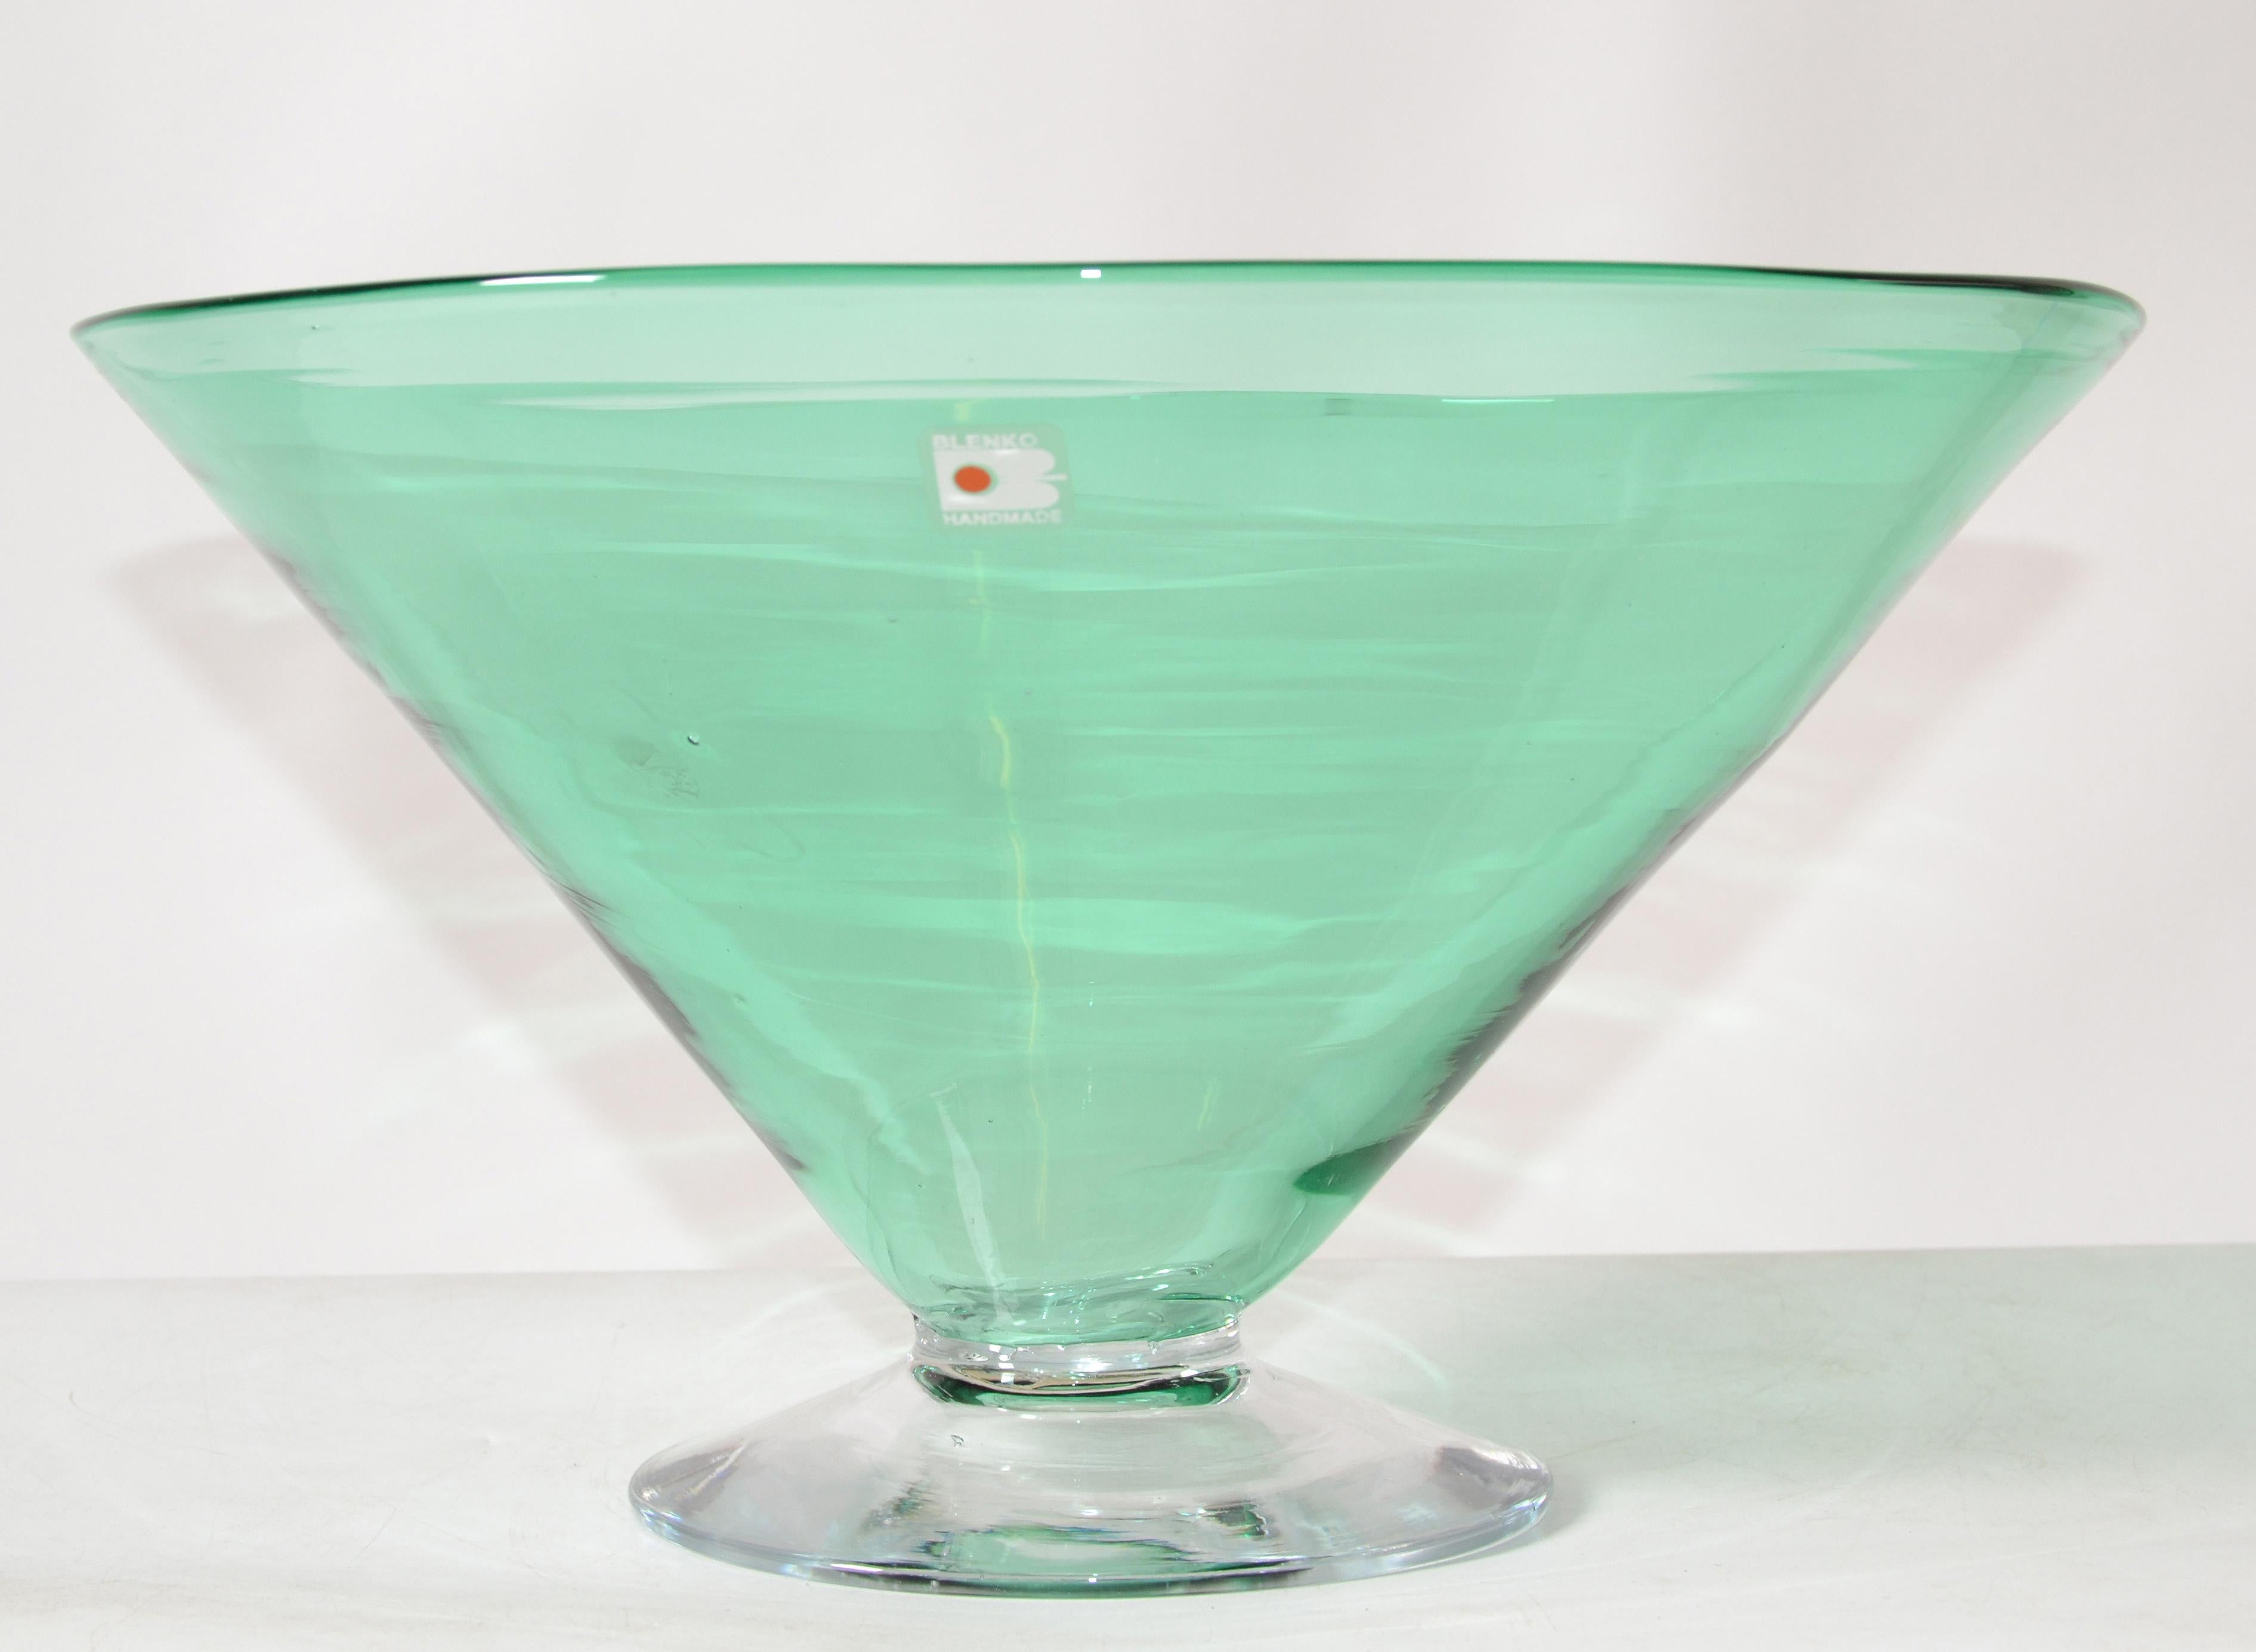 Marked Blenko Mid-Century Modern handmade Art Glass Bowl made in America 1980.
Can be used as serving bowl or centerpiece.
Foil label at the bowl.